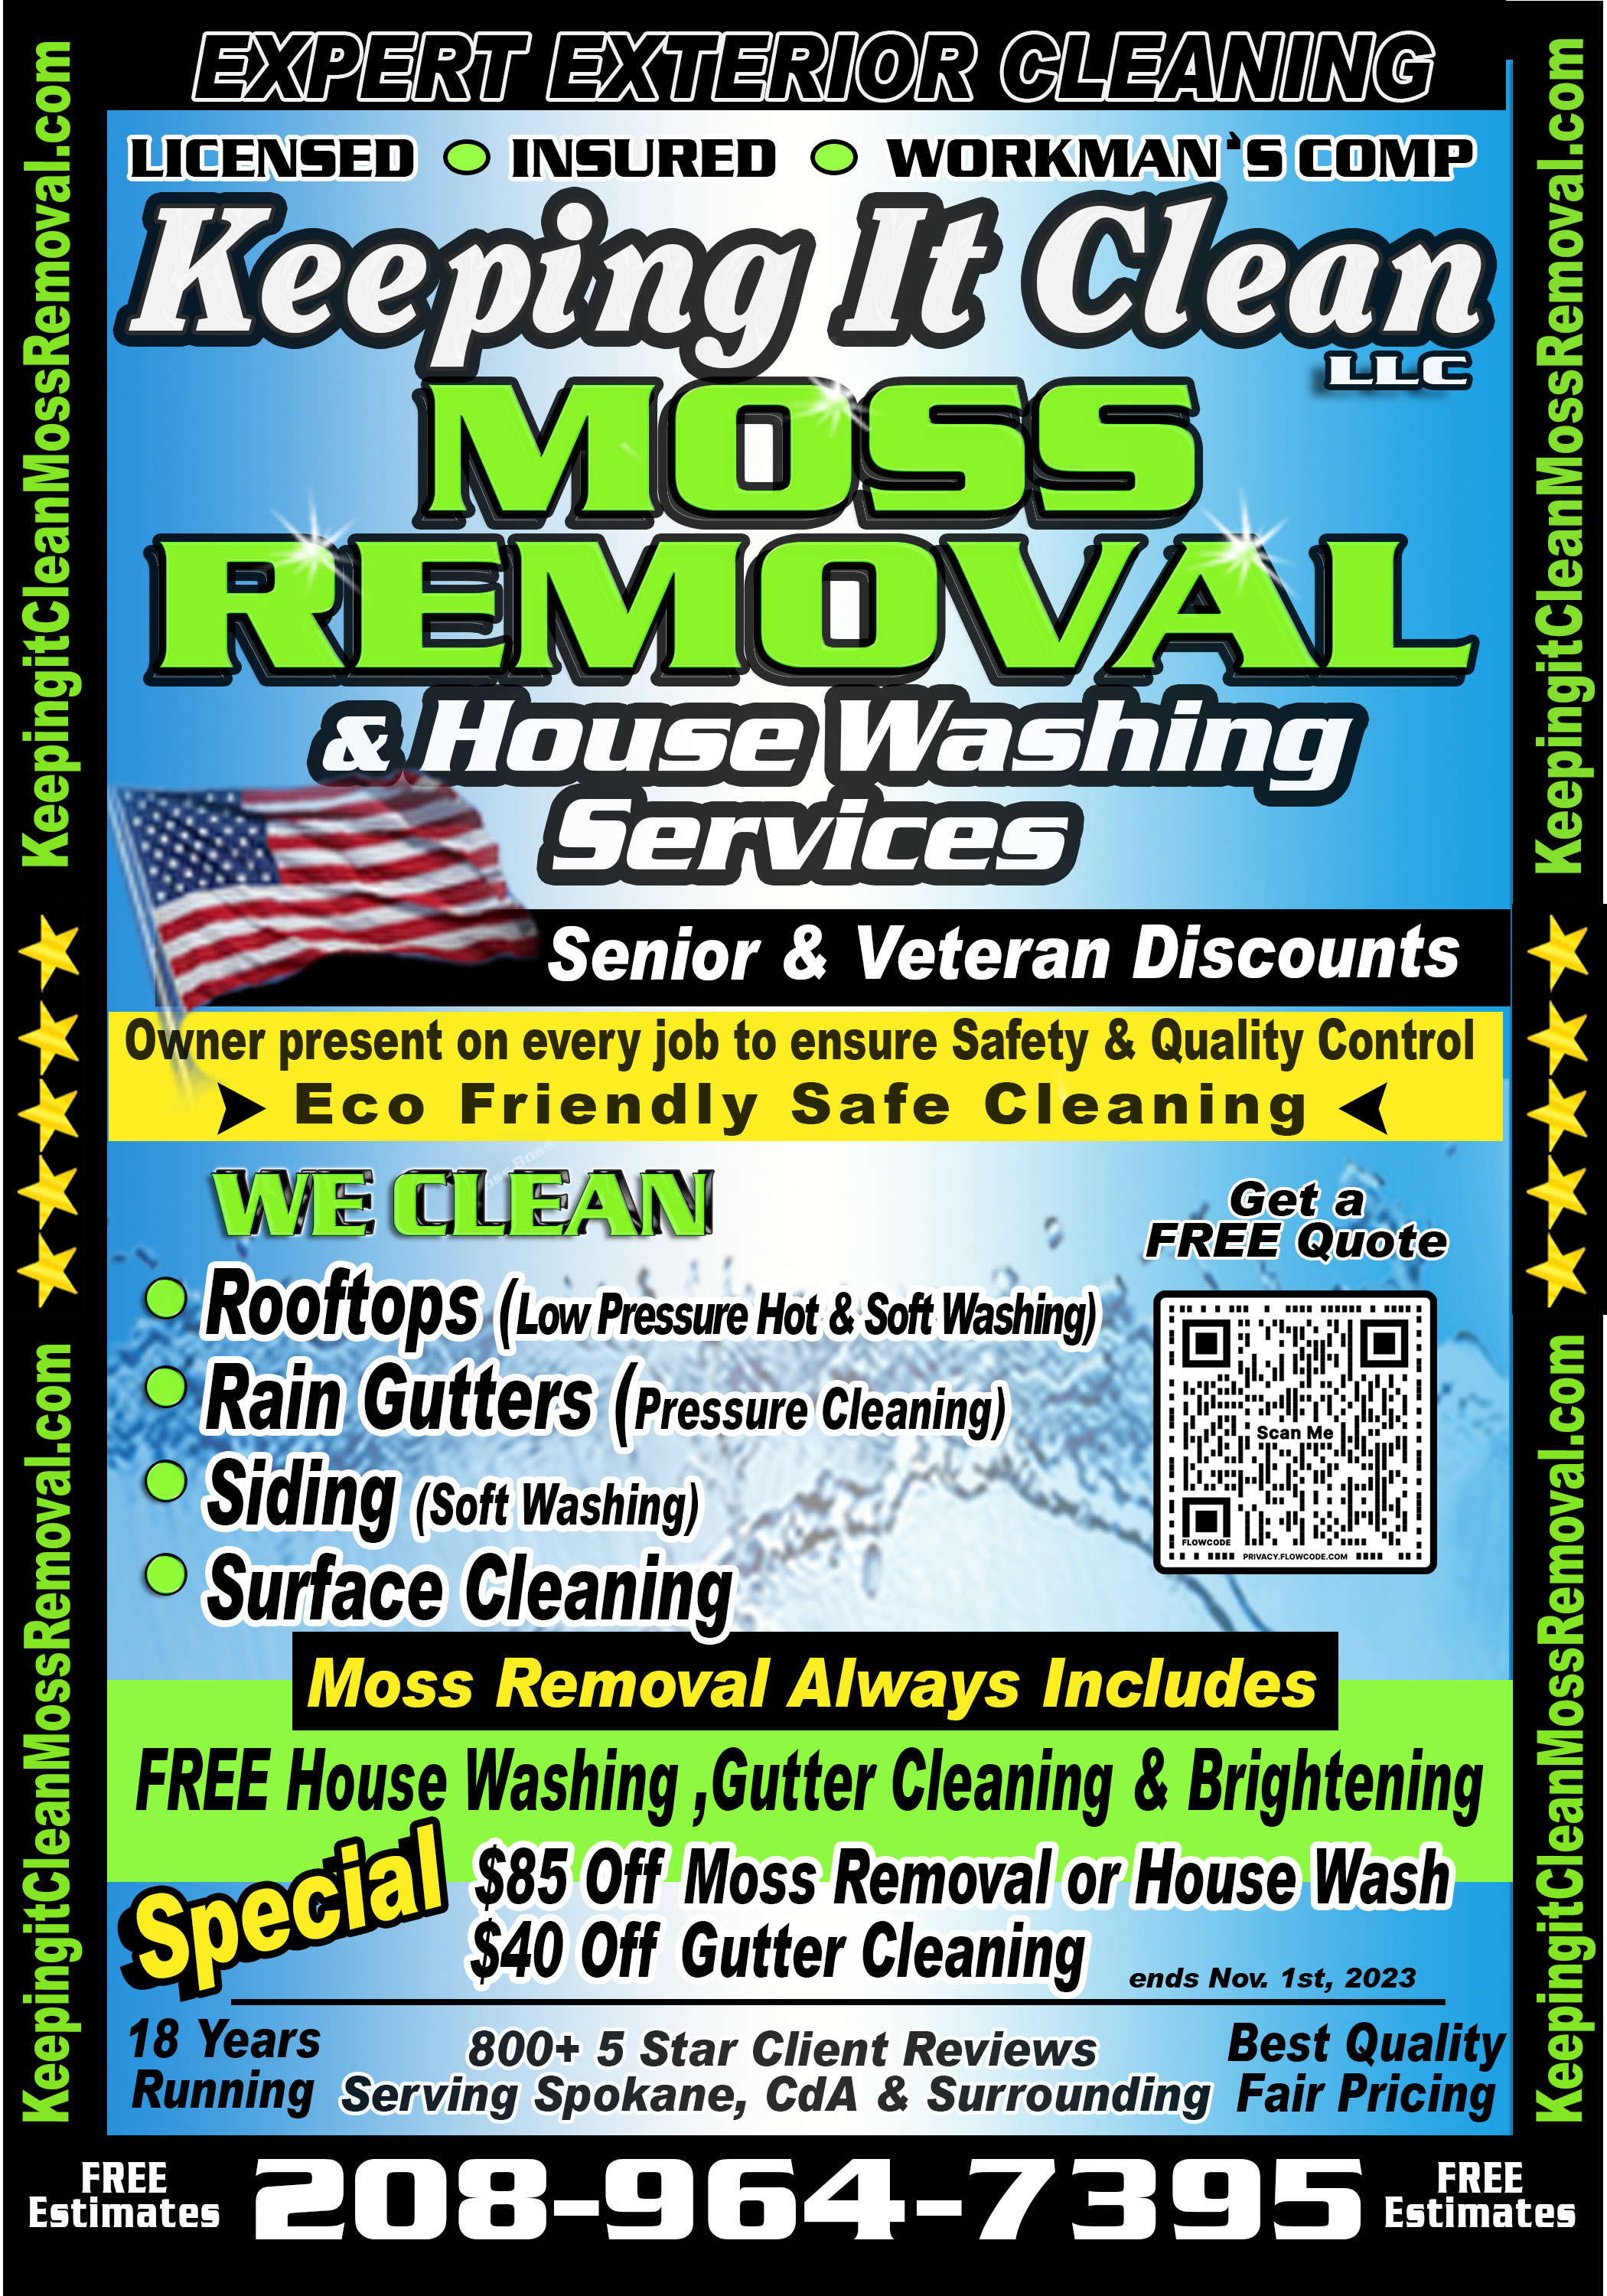 KEEPING IT CLEAN, LLC EXPERT  KEEPING IT CLEAN, LLC EXPERT EXTERIOR CLEANING MOSS REMOVAL & HOUSE WASHING SERVICE WE CLEAN ROOFS, RAIN GUTTERS, SIDING, SURFACE CLEANING - MOSS REMOVAL ALWAYS INCLUDED FREE HOUSE WASHING, GUTTER CLEANING & BRIGHTENING SPECIAL $85 OFF MOSS REMOVAL OR HOUSE WASH $40 OFF GUTTER CLEANING 18 YEARS , 800+ 5-STARS CLIENT REVIEWS SERVING SPOKANE, CDA & SURROUNDING KEEPINGITCLEANMOSSREMOVAL.COM 208-964-7395 FREE ESTIMATES LICENSED, INSURED, WORKMAN’S COMP